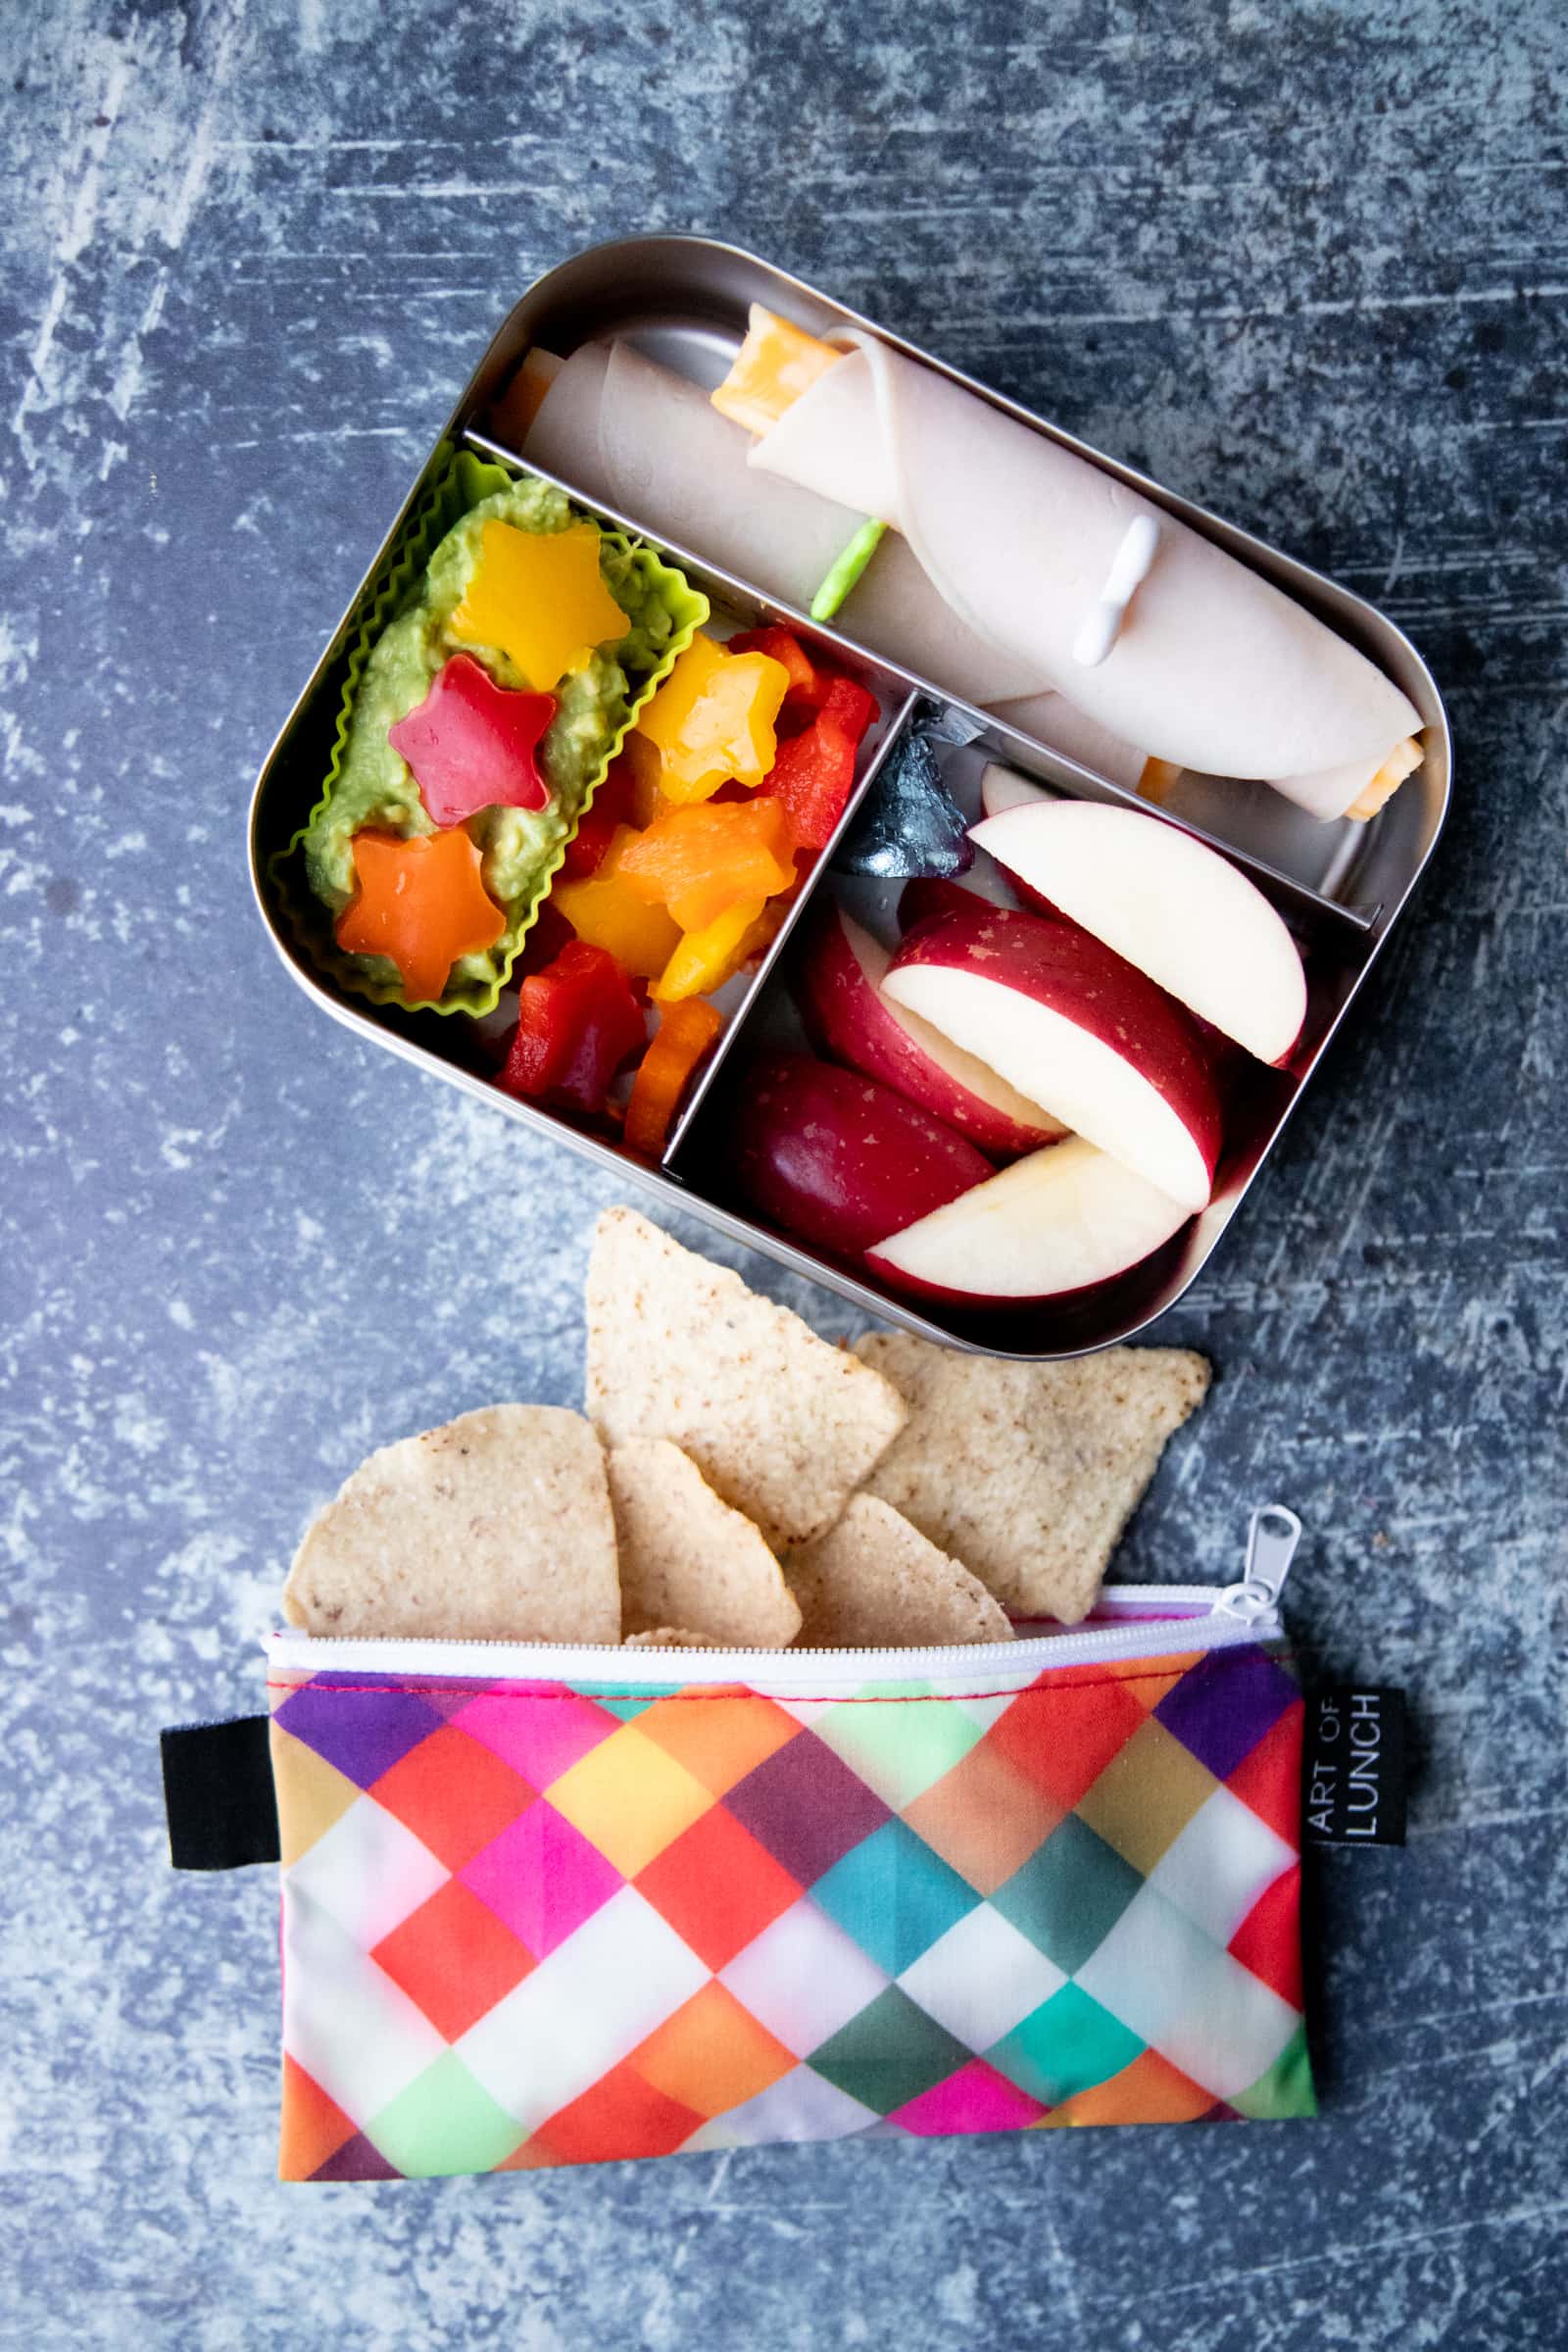 Packed school lunch of apple slices, bell pepper stars, guacamole, turkey and cheese roll-ups, and a bag of tortilla chips.